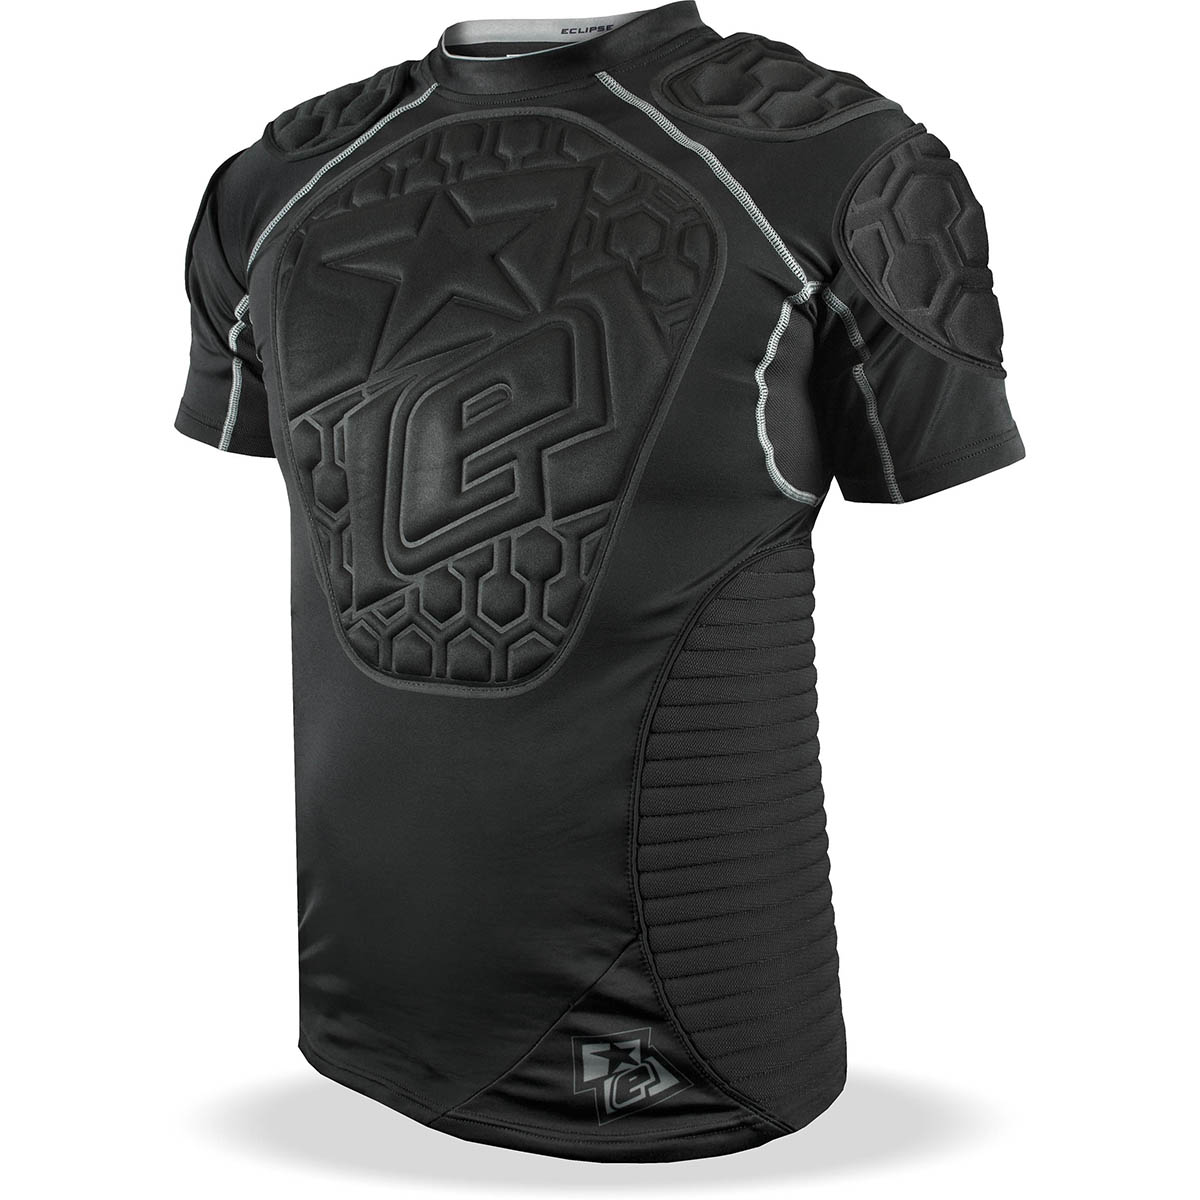 Planet Eclipse Overload Jersey G2